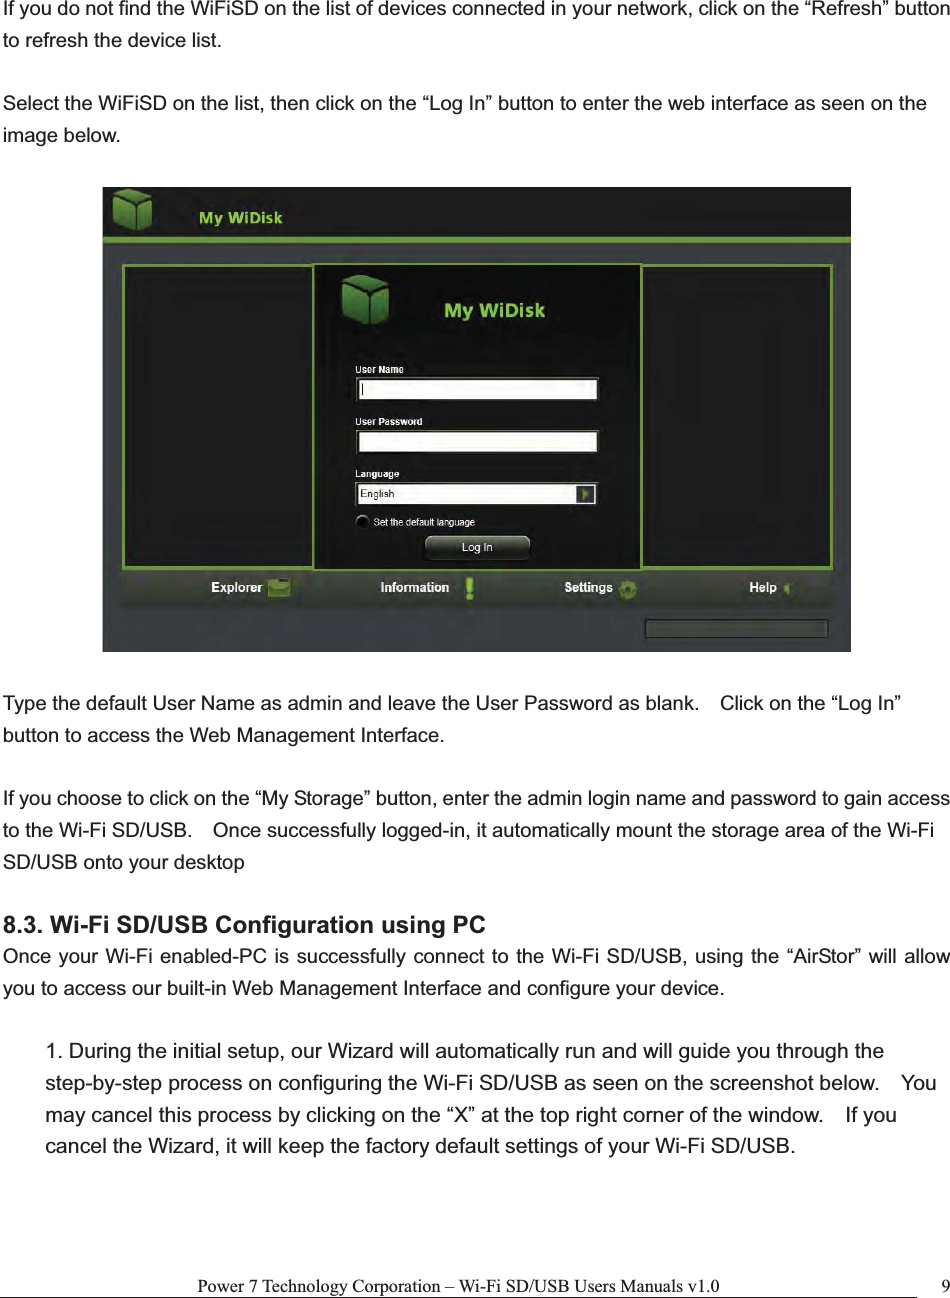 Power 7 Technology Corporation – Wi-Fi SD/USB Users Manuals v1.0  9If you do not find the WiFiSD on the list of devices connected in your network, click on the “Refresh” button to refresh the device list. Select the WiFiSD on the list, then click on the “Log In” button to enter the web interface as seen on the image below.   Type the default User Name as admin and leave the User Password as blank.    Click on the “Log In” button to access the Web Management Interface. If you choose to click on the “My Storage” button, enter the admin login name and password to gain access to the Wi-Fi SD/USB.    Once successfully logged-in, it automatically mount the storage area of the Wi-Fi SD/USB onto your desktop 8.3. Wi-Fi SD/USB Configuration using PC Once your Wi-Fi enabled-PC is successfully connect to the Wi-Fi SD/USB, using the “AirStor” will allow you to access our built-in Web Management Interface and configure your device.   1. During the initial setup, our Wizard will automatically run and will guide you through the step-by-step process on configuring the Wi-Fi SD/USB as seen on the screenshot below.    You may cancel this process by clicking on the “X” at the top right corner of the window.    If you cancel the Wizard, it will keep the factory default settings of your Wi-Fi SD/USB.   